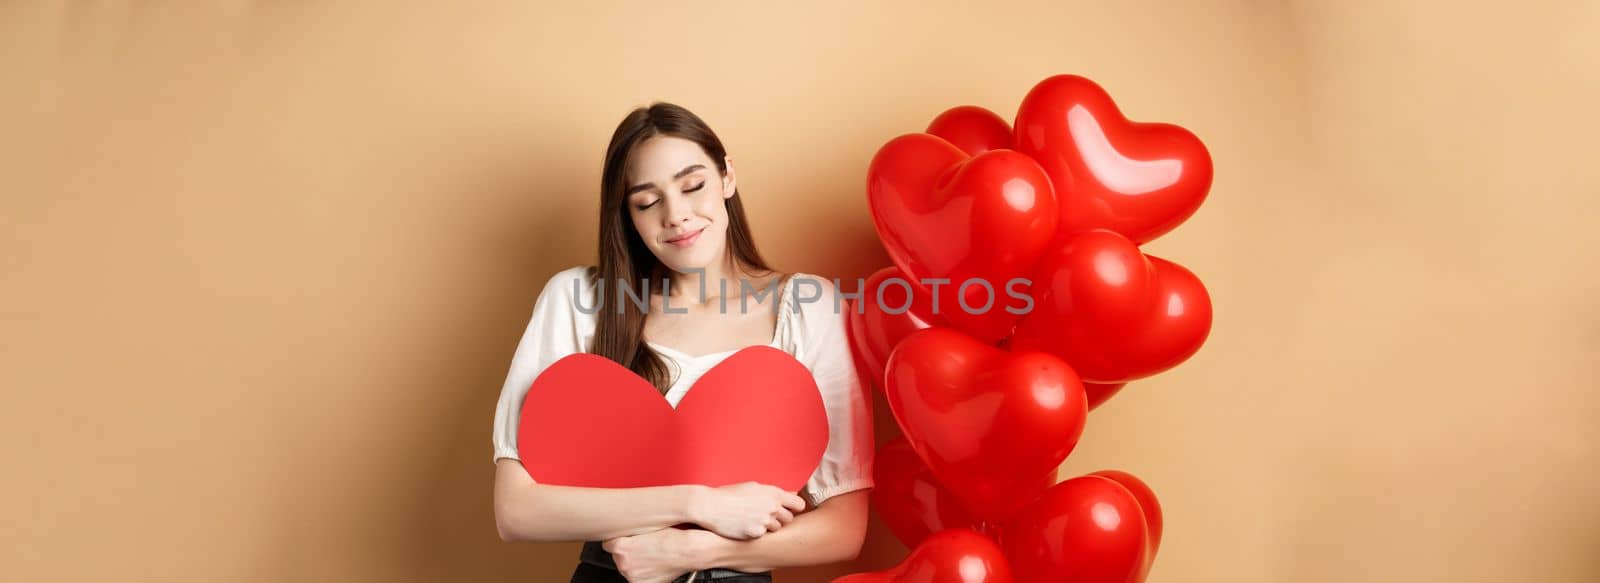 Romantic woman hugging big red heart and smiling dreamy, falling in love on Valentines day, dreaming about lover, standing on beige background near balloons by Benzoix